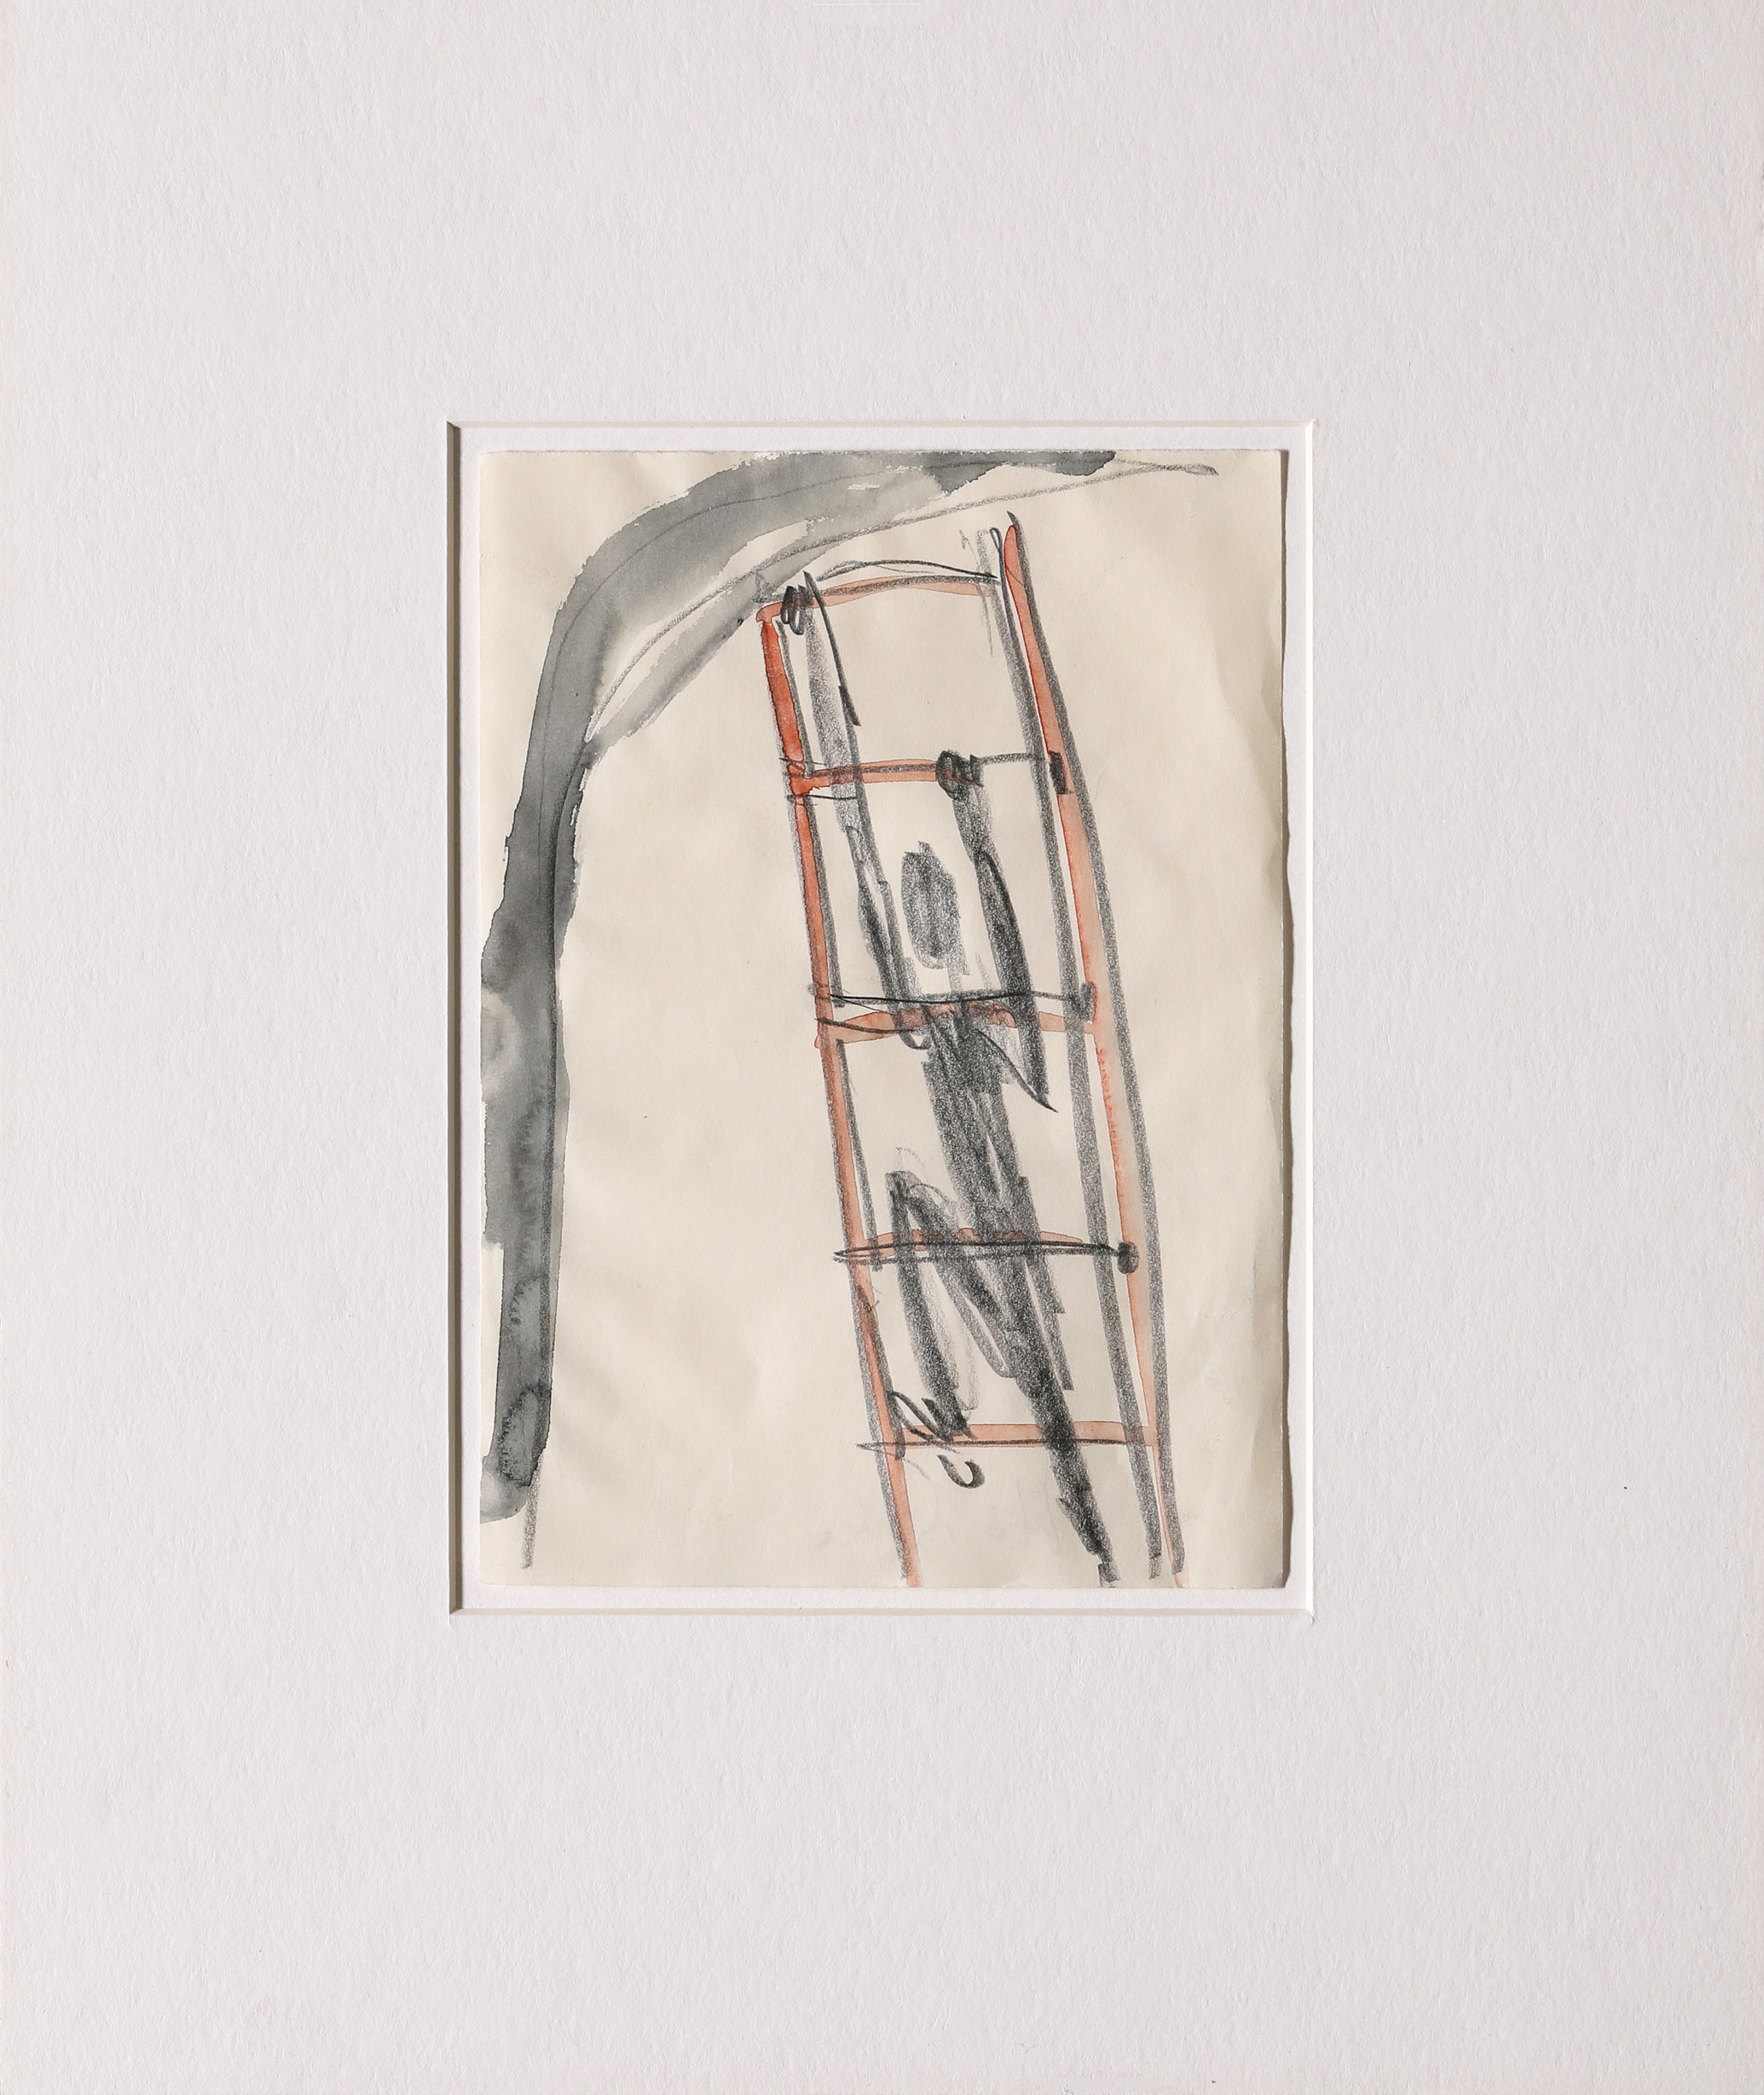 Karl Horst Hödicke*, Pencil and watercolor on paper - Image 2 of 5